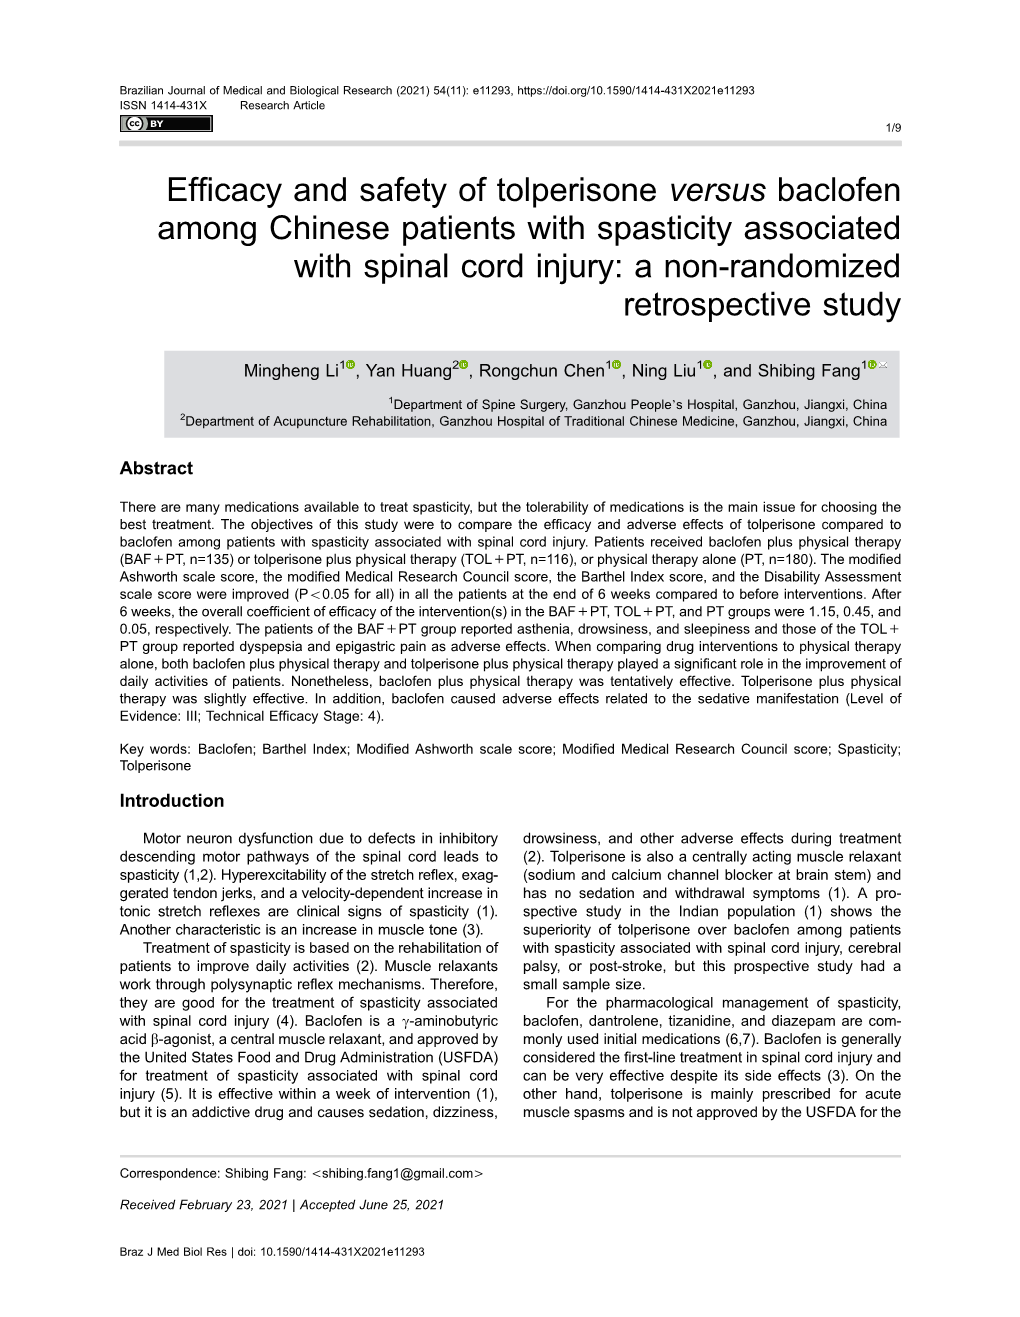 Efficacy and Safety of Tolperisone Versus Baclofen Among Chinese Patients with Spasticity Associated with Spinal Cord Injury: A